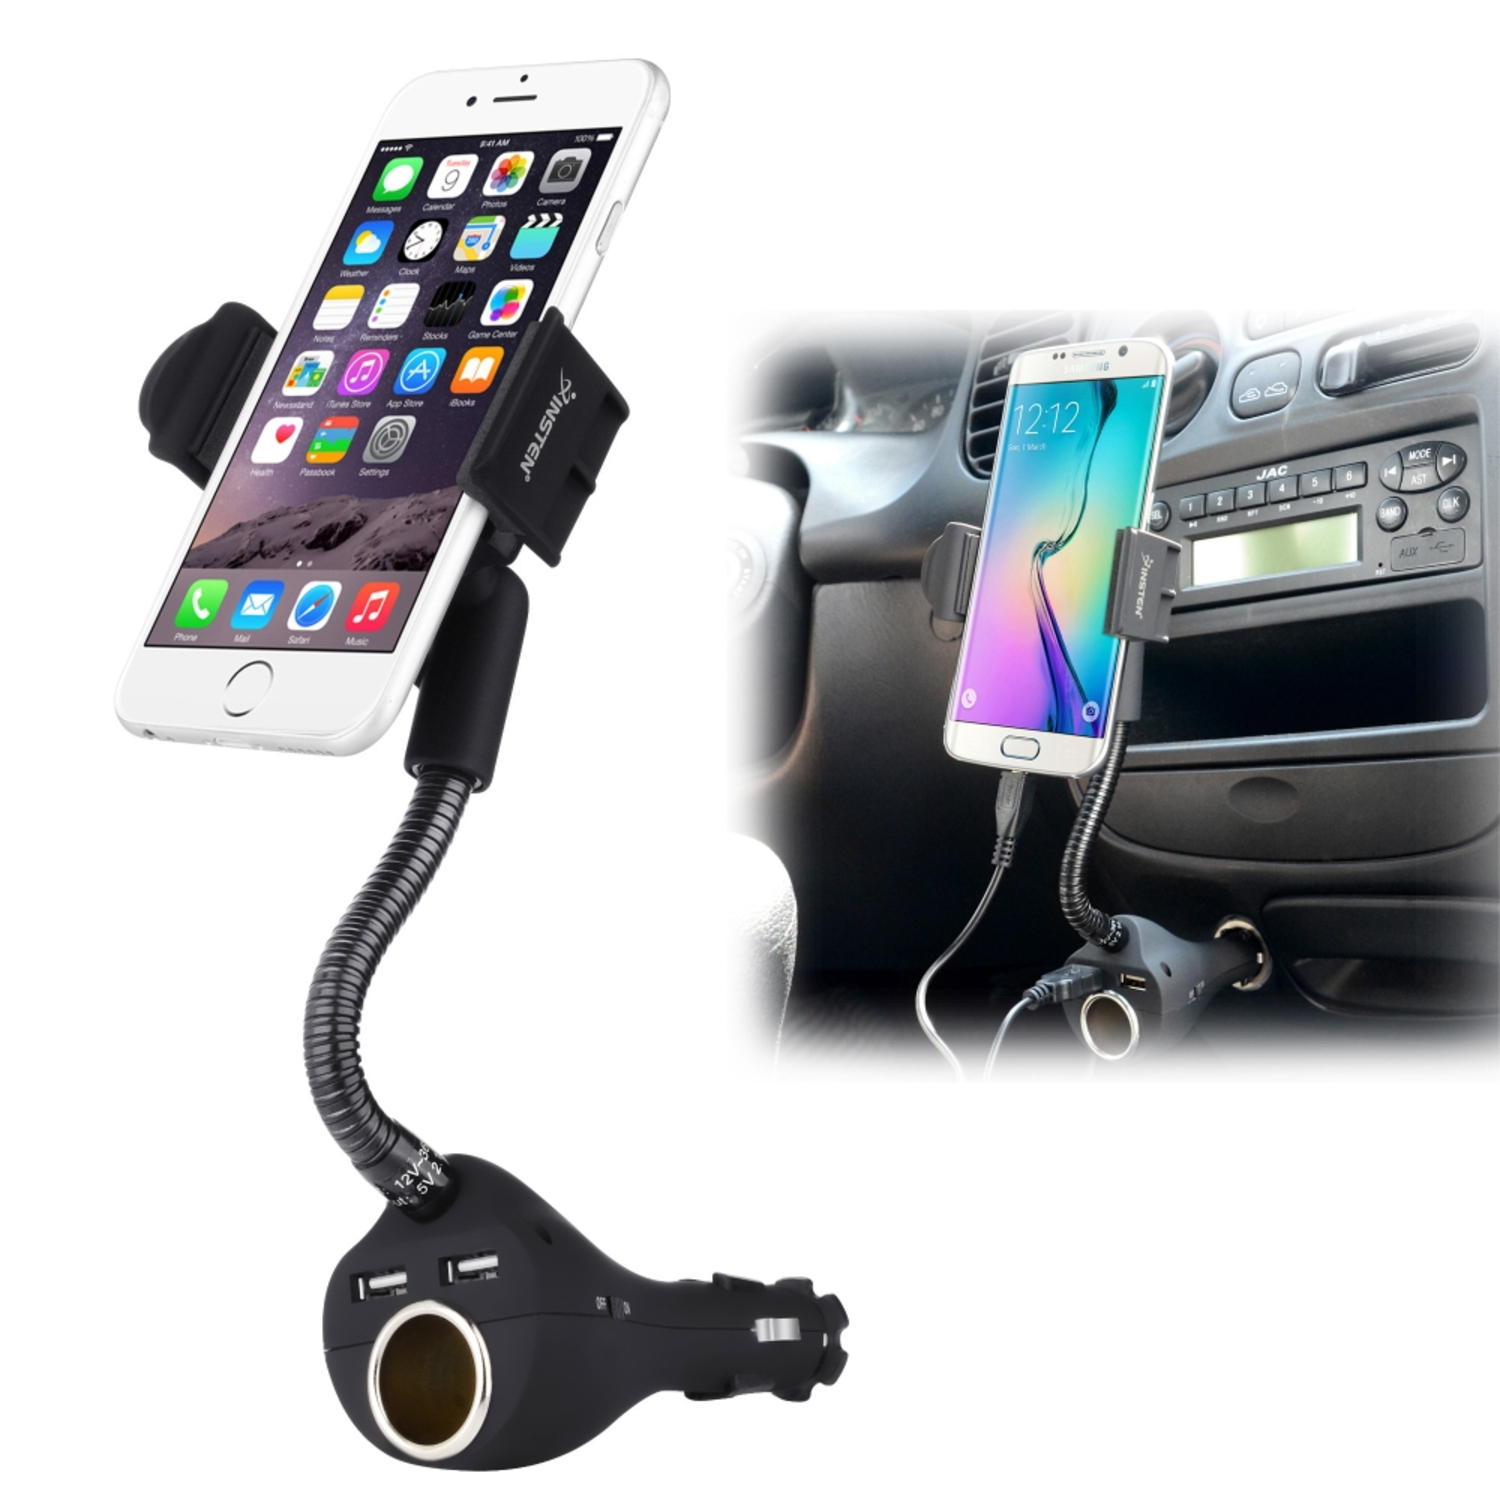 Insten Universal Car Mount Phone Holder w\/2-Port USB Charger & Socket For iPhone Galaxy S7 Edge Phones Width Up to 3.35 Inches, Black